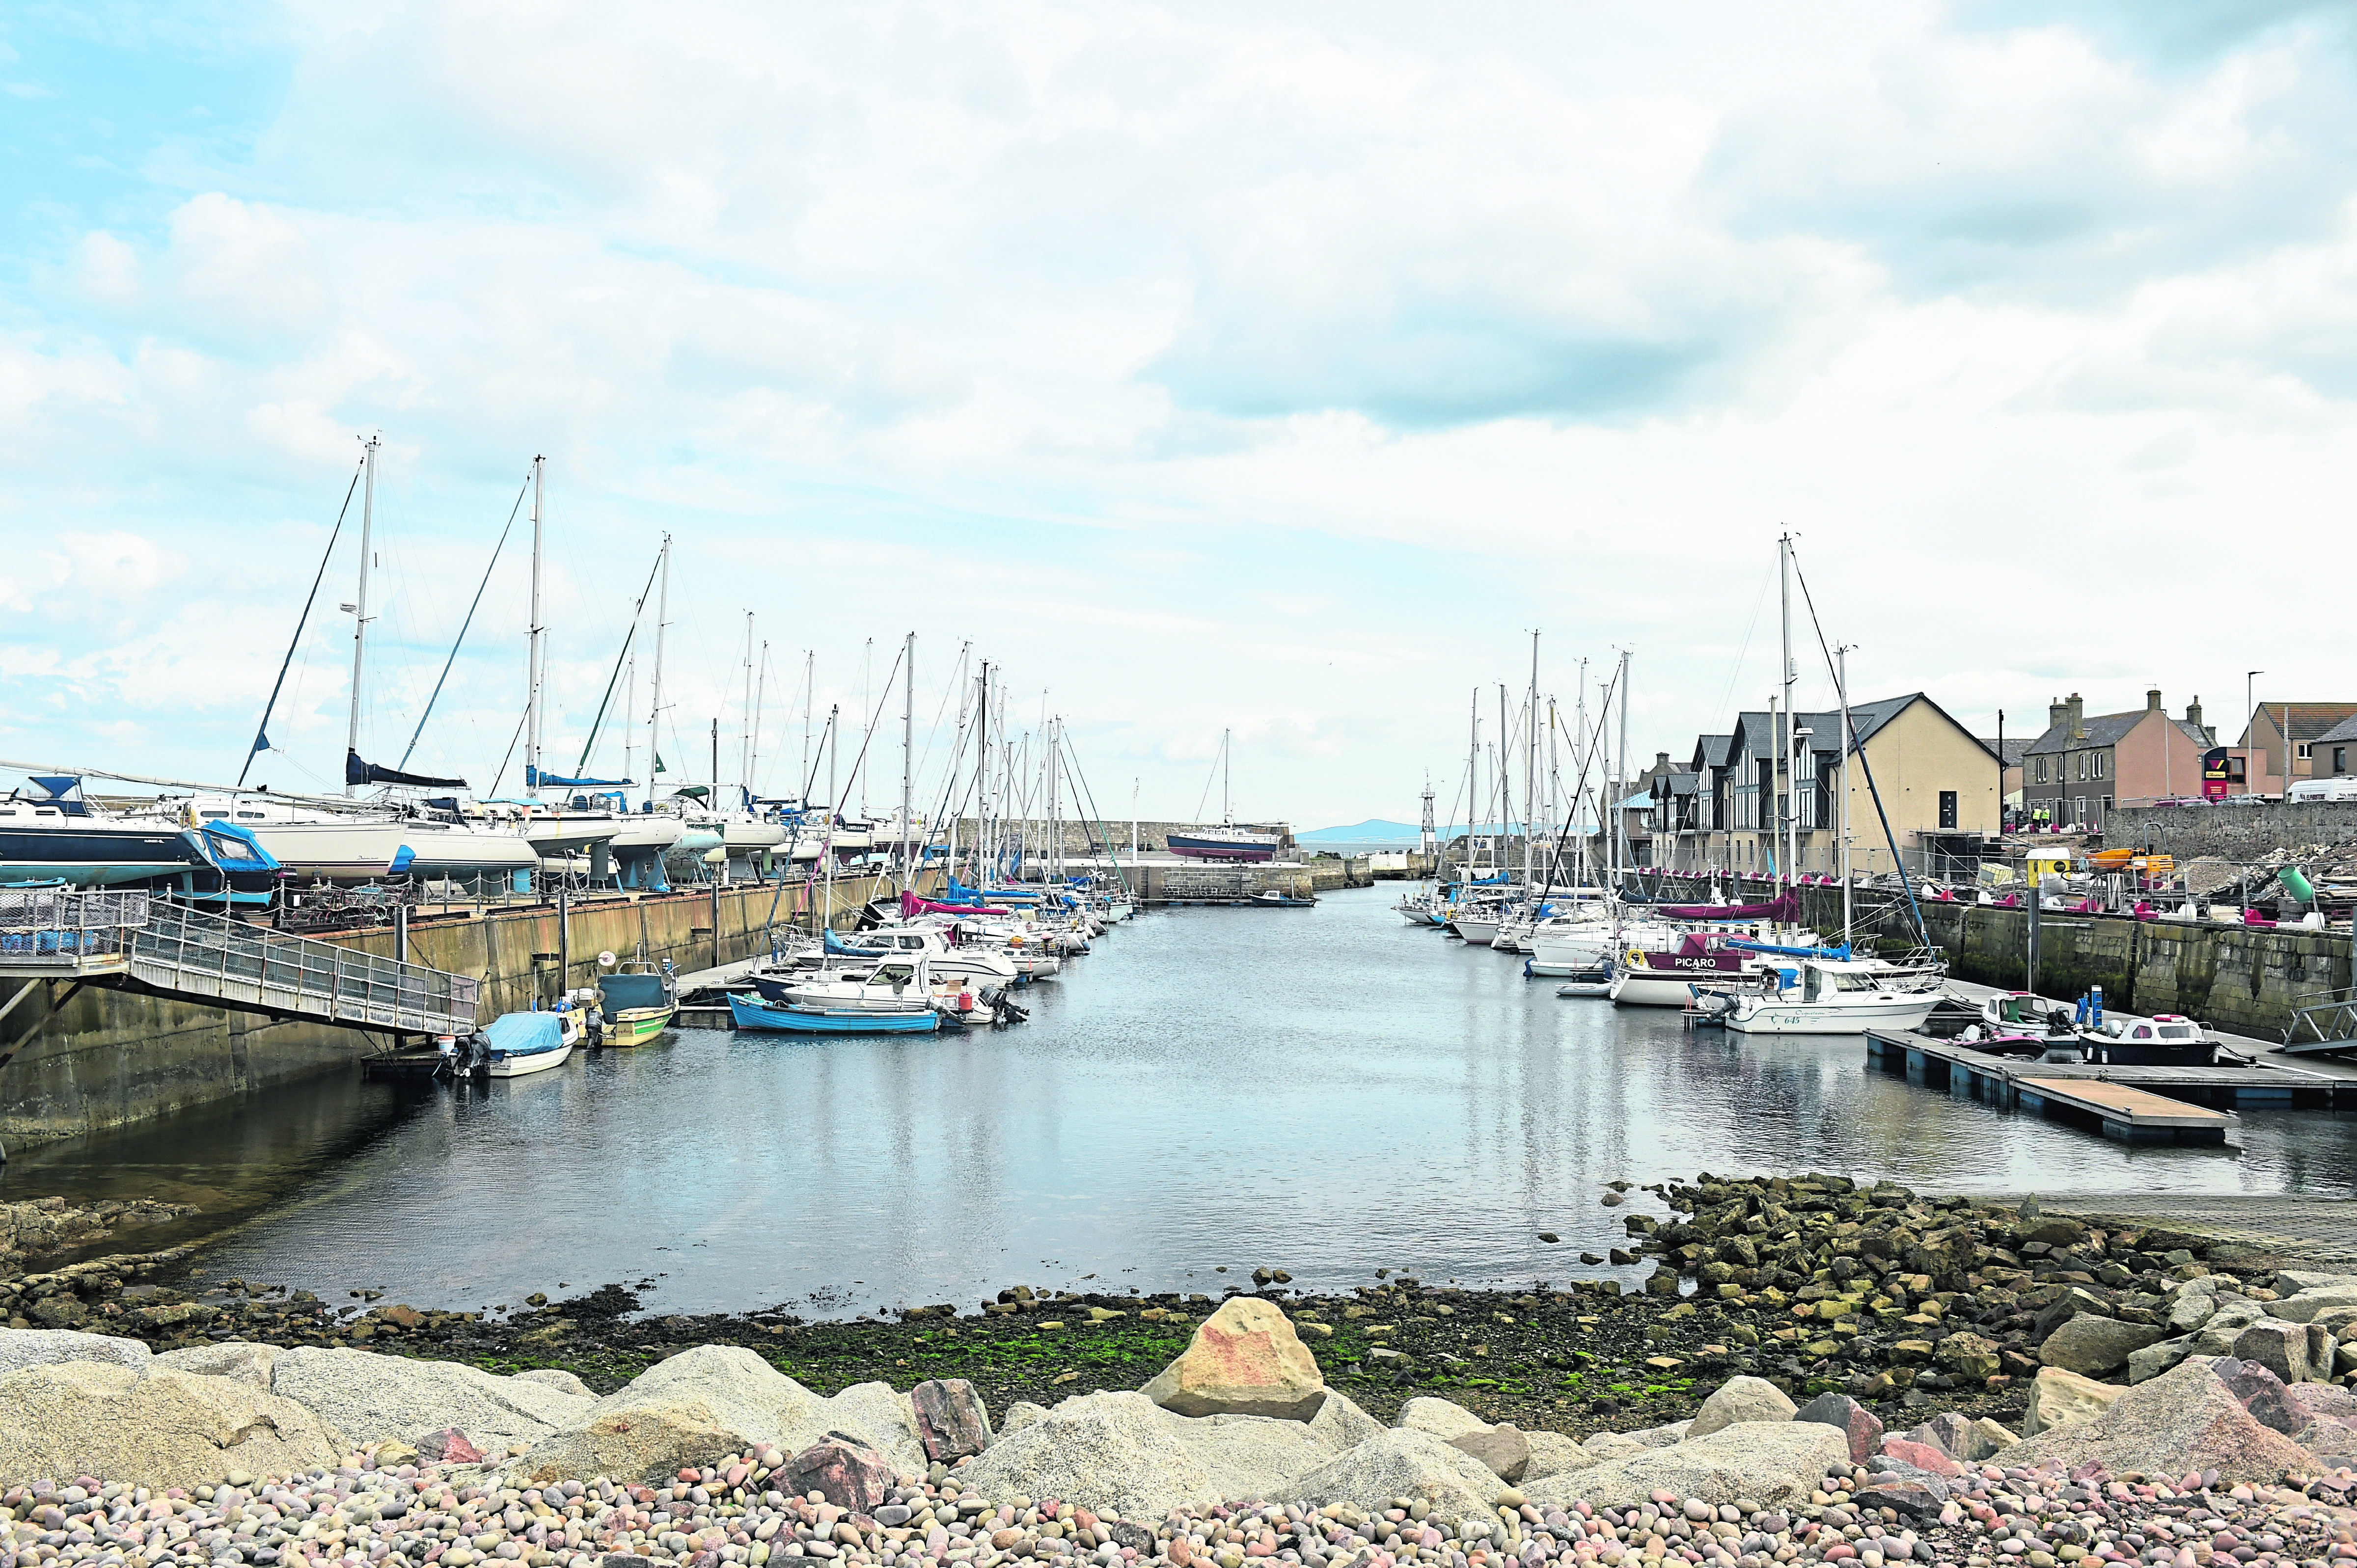 Lossiemouth Marina.
Picture by Jason Hedges